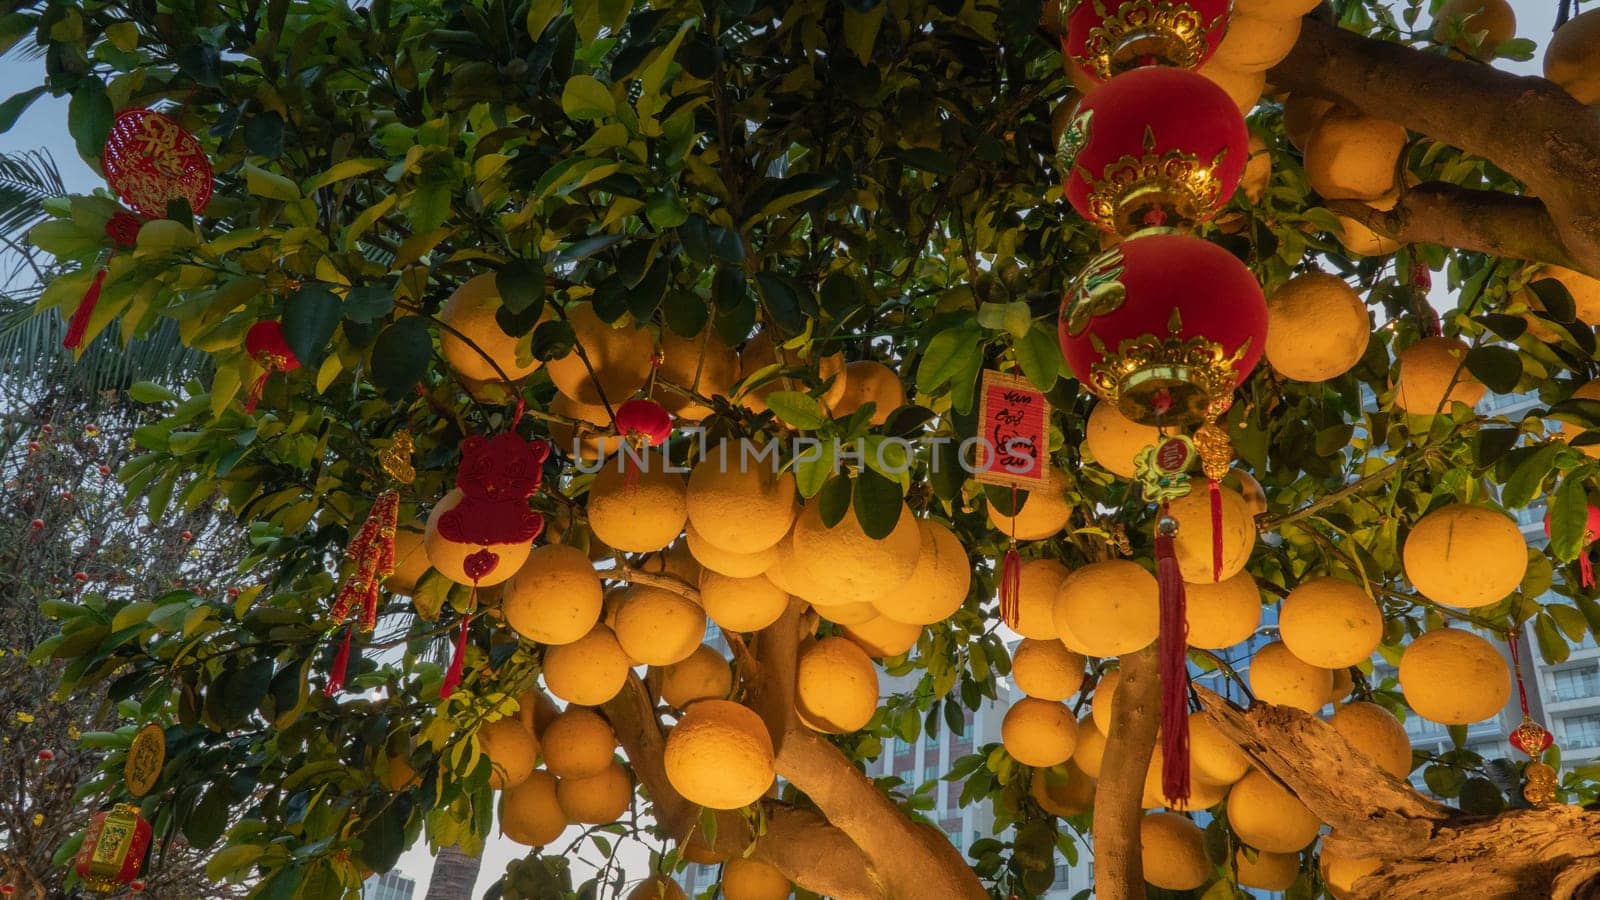 Grapefruit on a citrus tree with evening illumination and Chinese decorations by voktybre